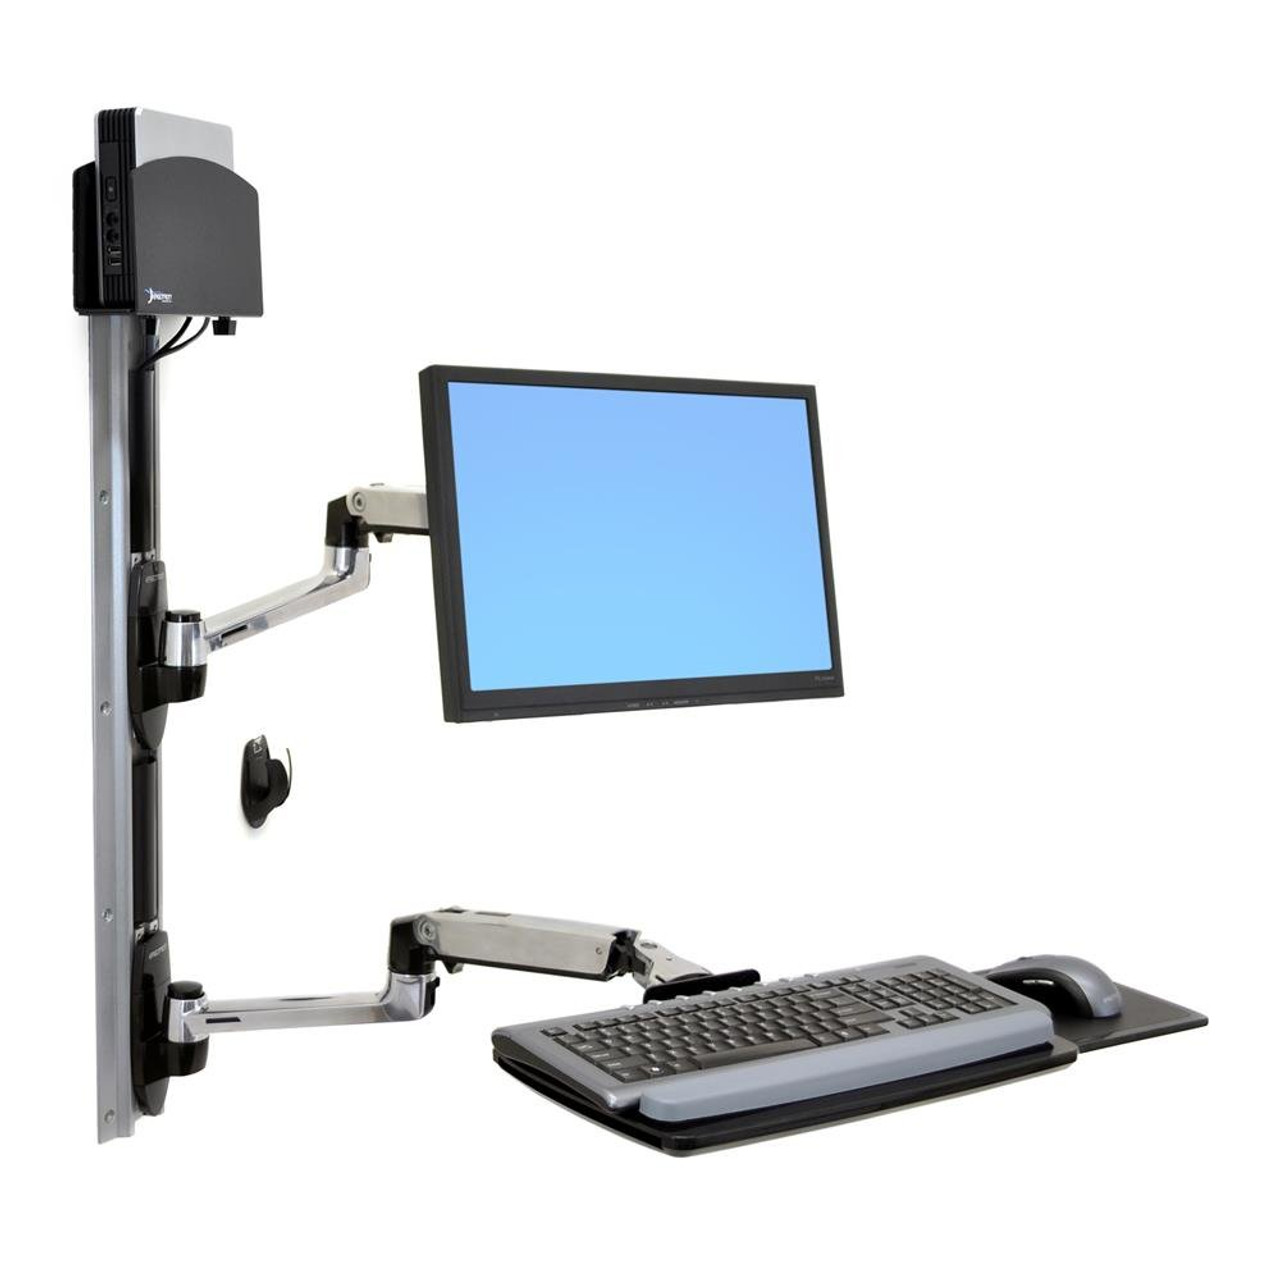 Altwork Monitor Mount Systems